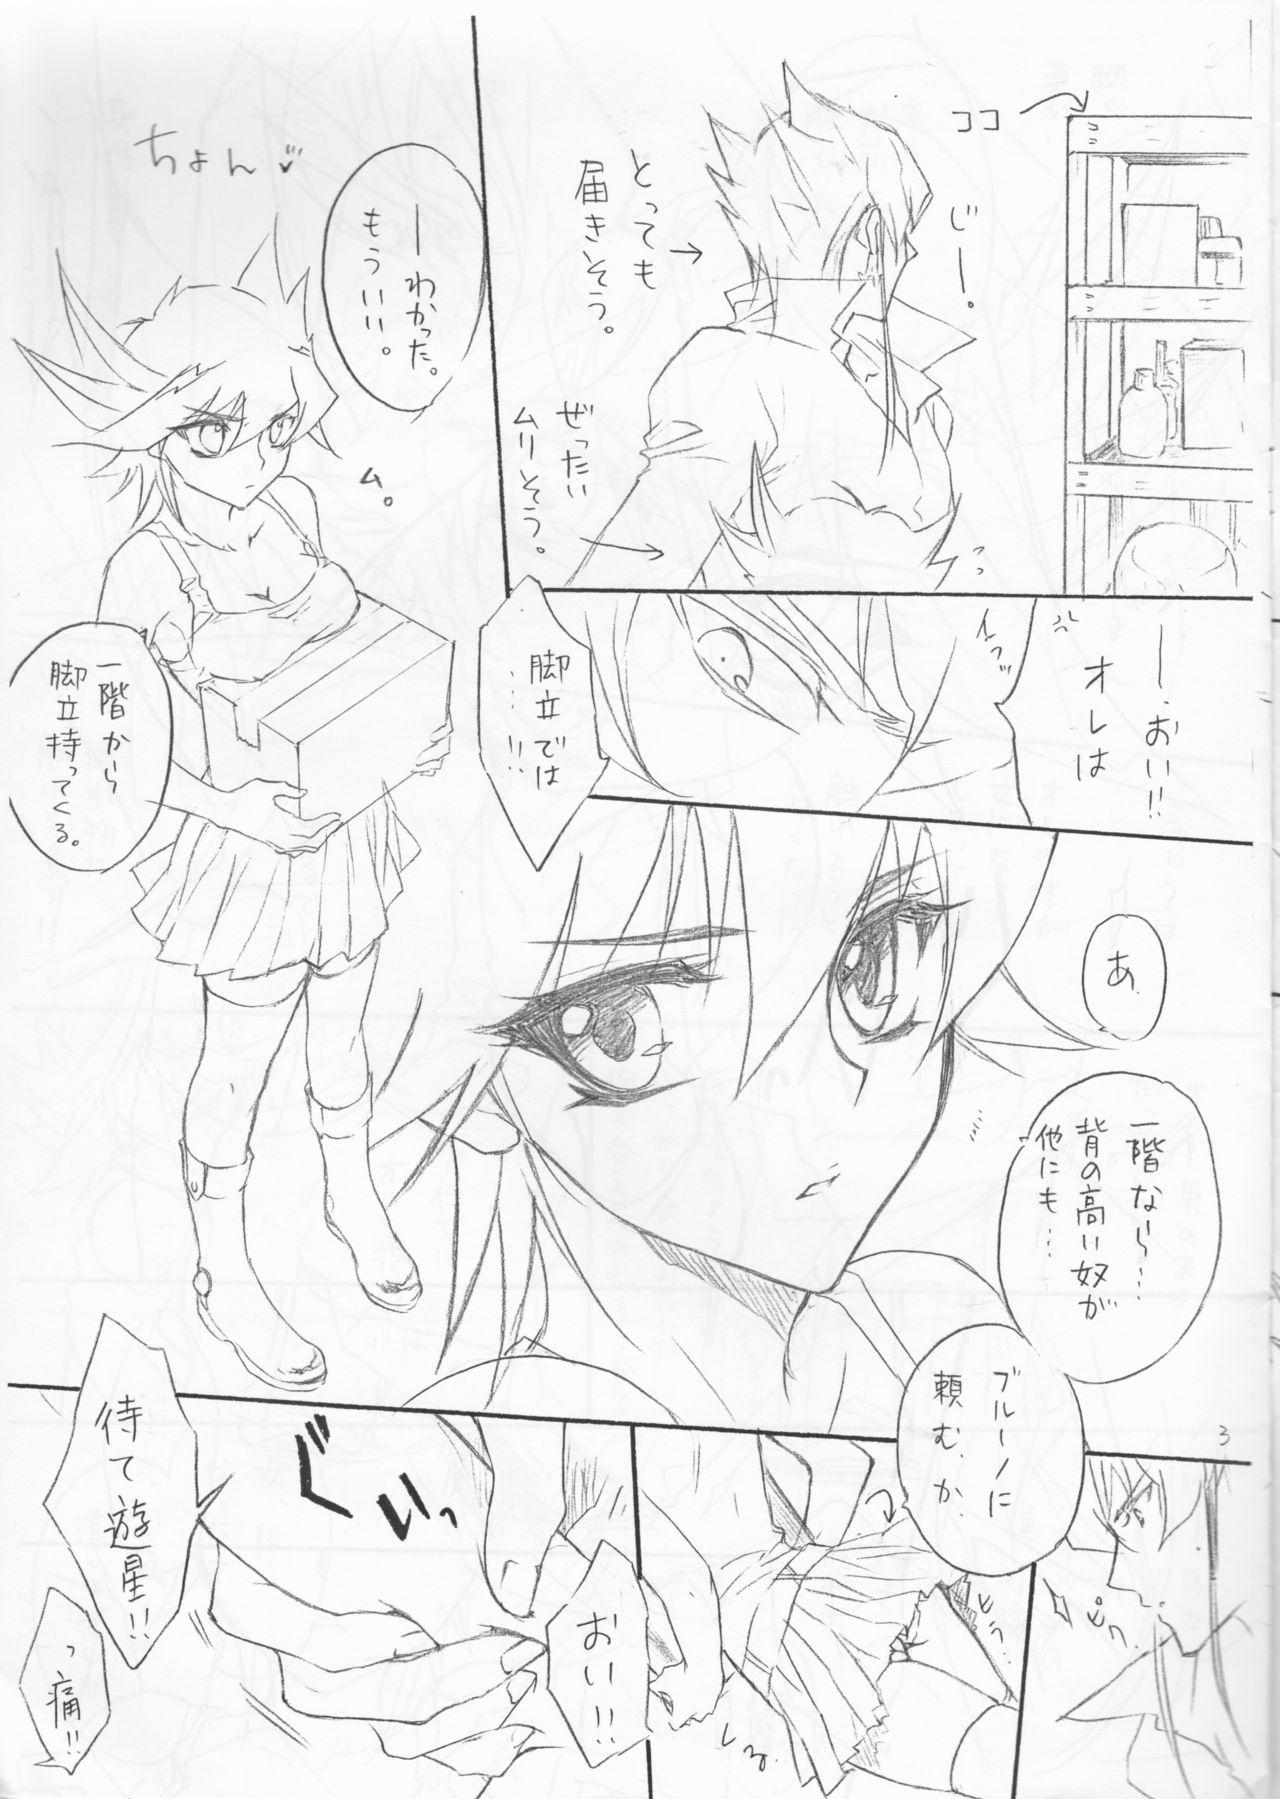 Longhair (SUPER19) [Milcrepe (Takashina Urara)] Onnanoko Yusei-chan to Jack-san no Hon. (Yu-Gi-Oh! 5D's) - Yu gi oh 5ds Young - Page 4